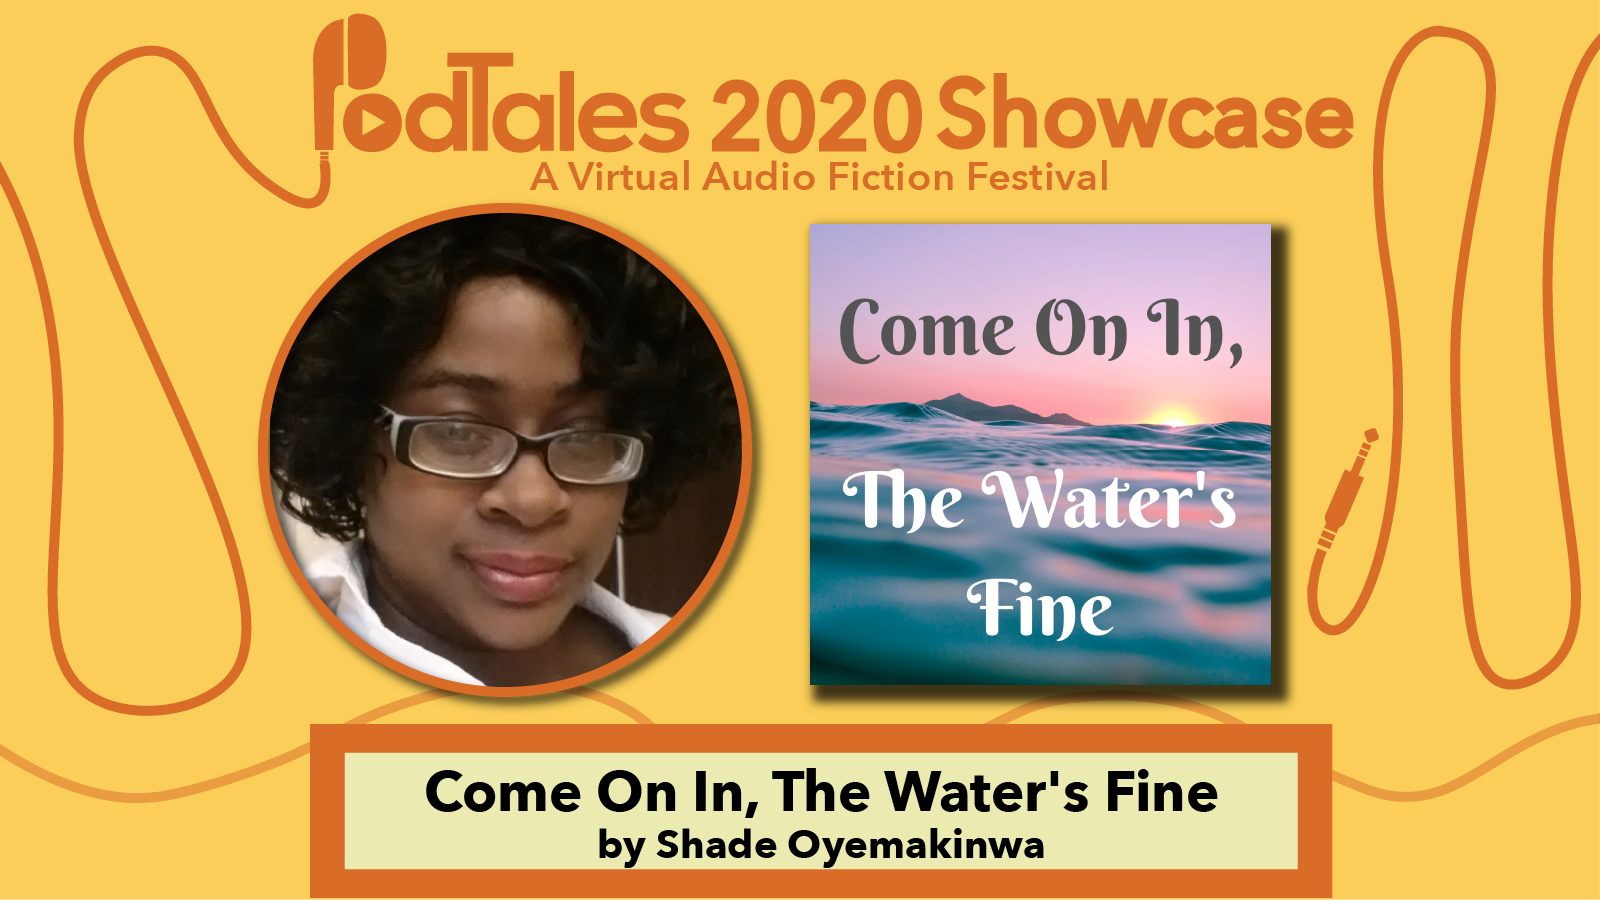 Text reading “PodTales 2020 Showcase: A Virtual Audio Fiction Festival”, Photo of Shade Oyemakinwa, Show Art for Come On In, The Water’s Fine, Text reading “Come On In, The Water’s Fine by Shade Oyemakinwa”